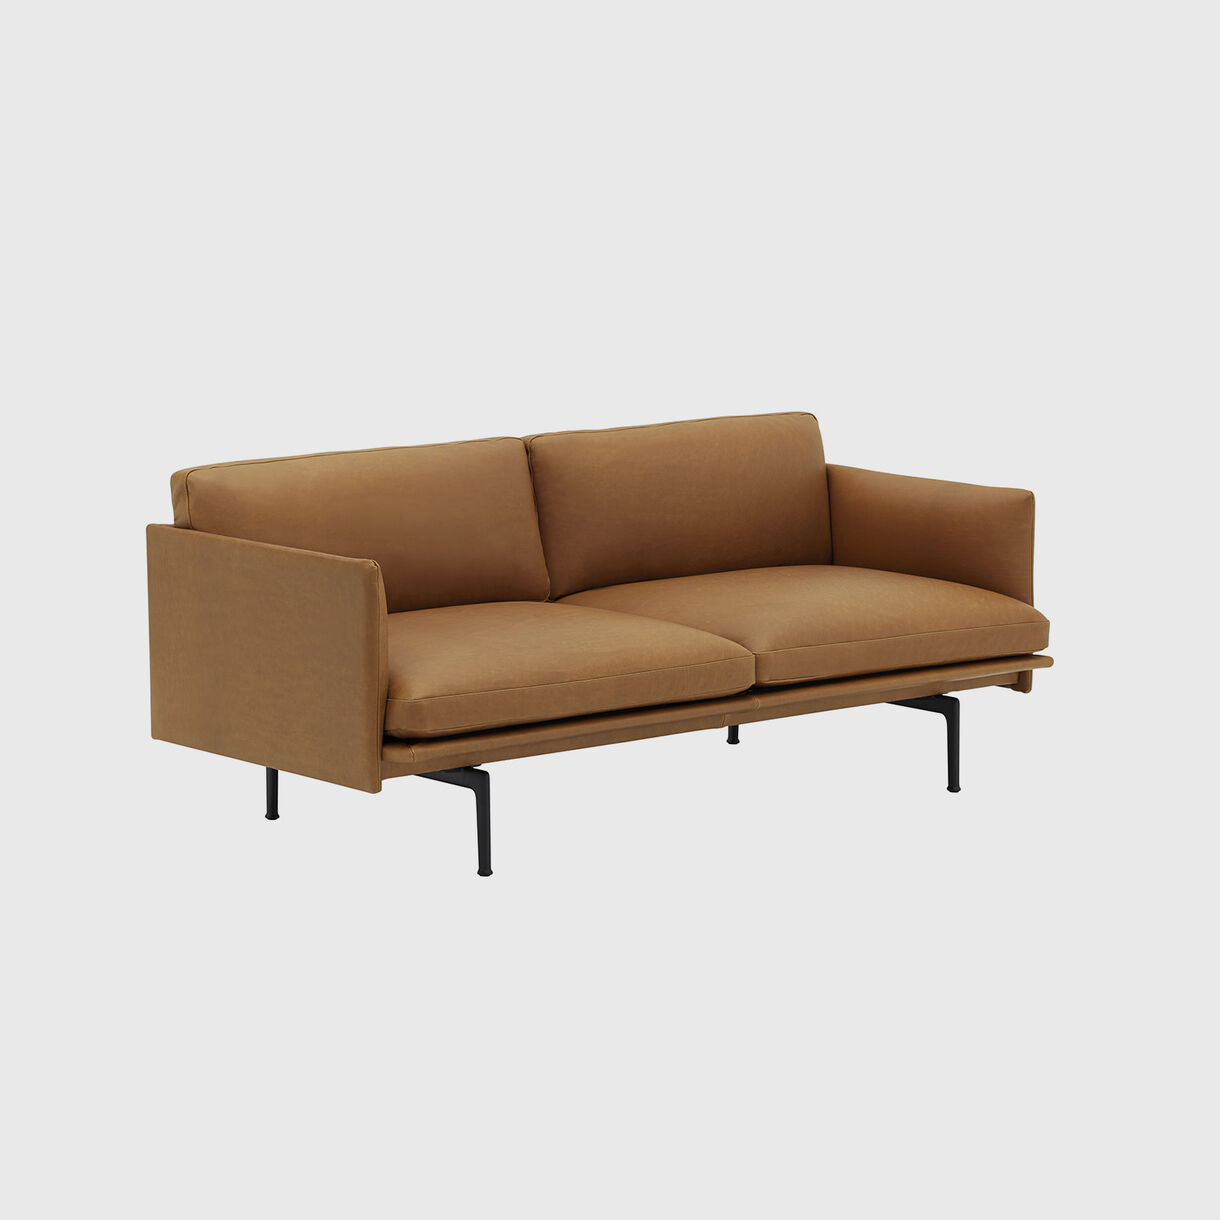 Outline 2 Seater Sofa, Cognac Leather